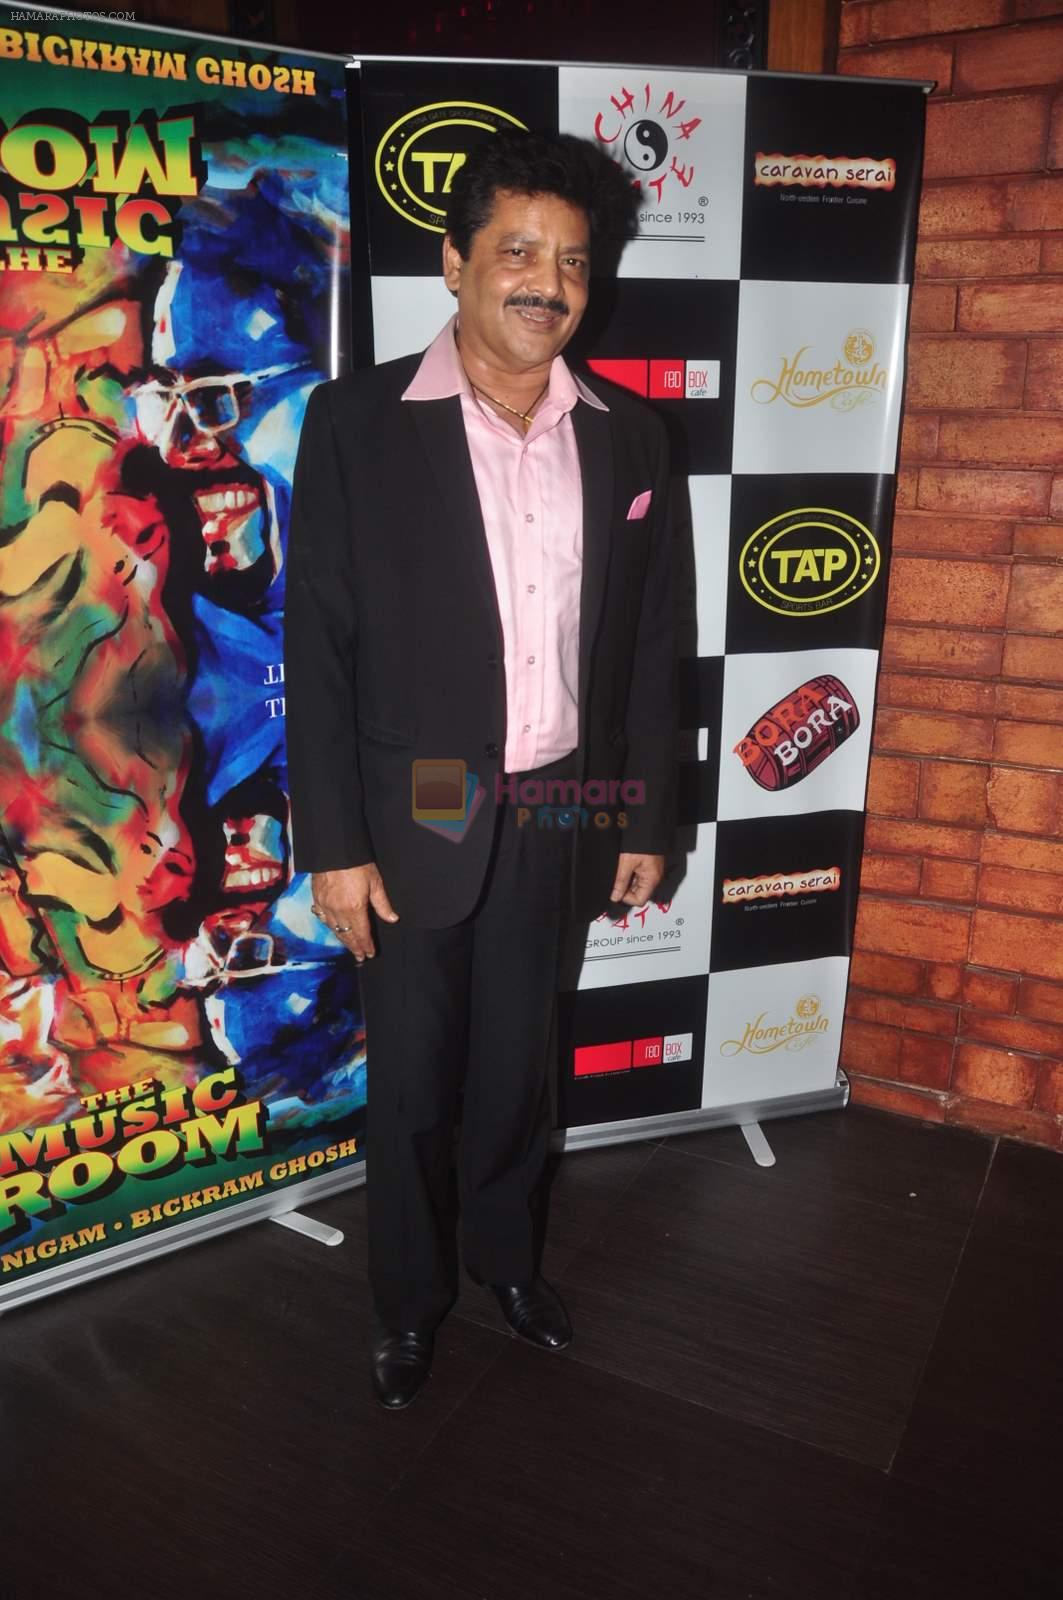 Udit Narayan at Bickram ghosh's album launch in Tap Bar on 25th Feb 2015